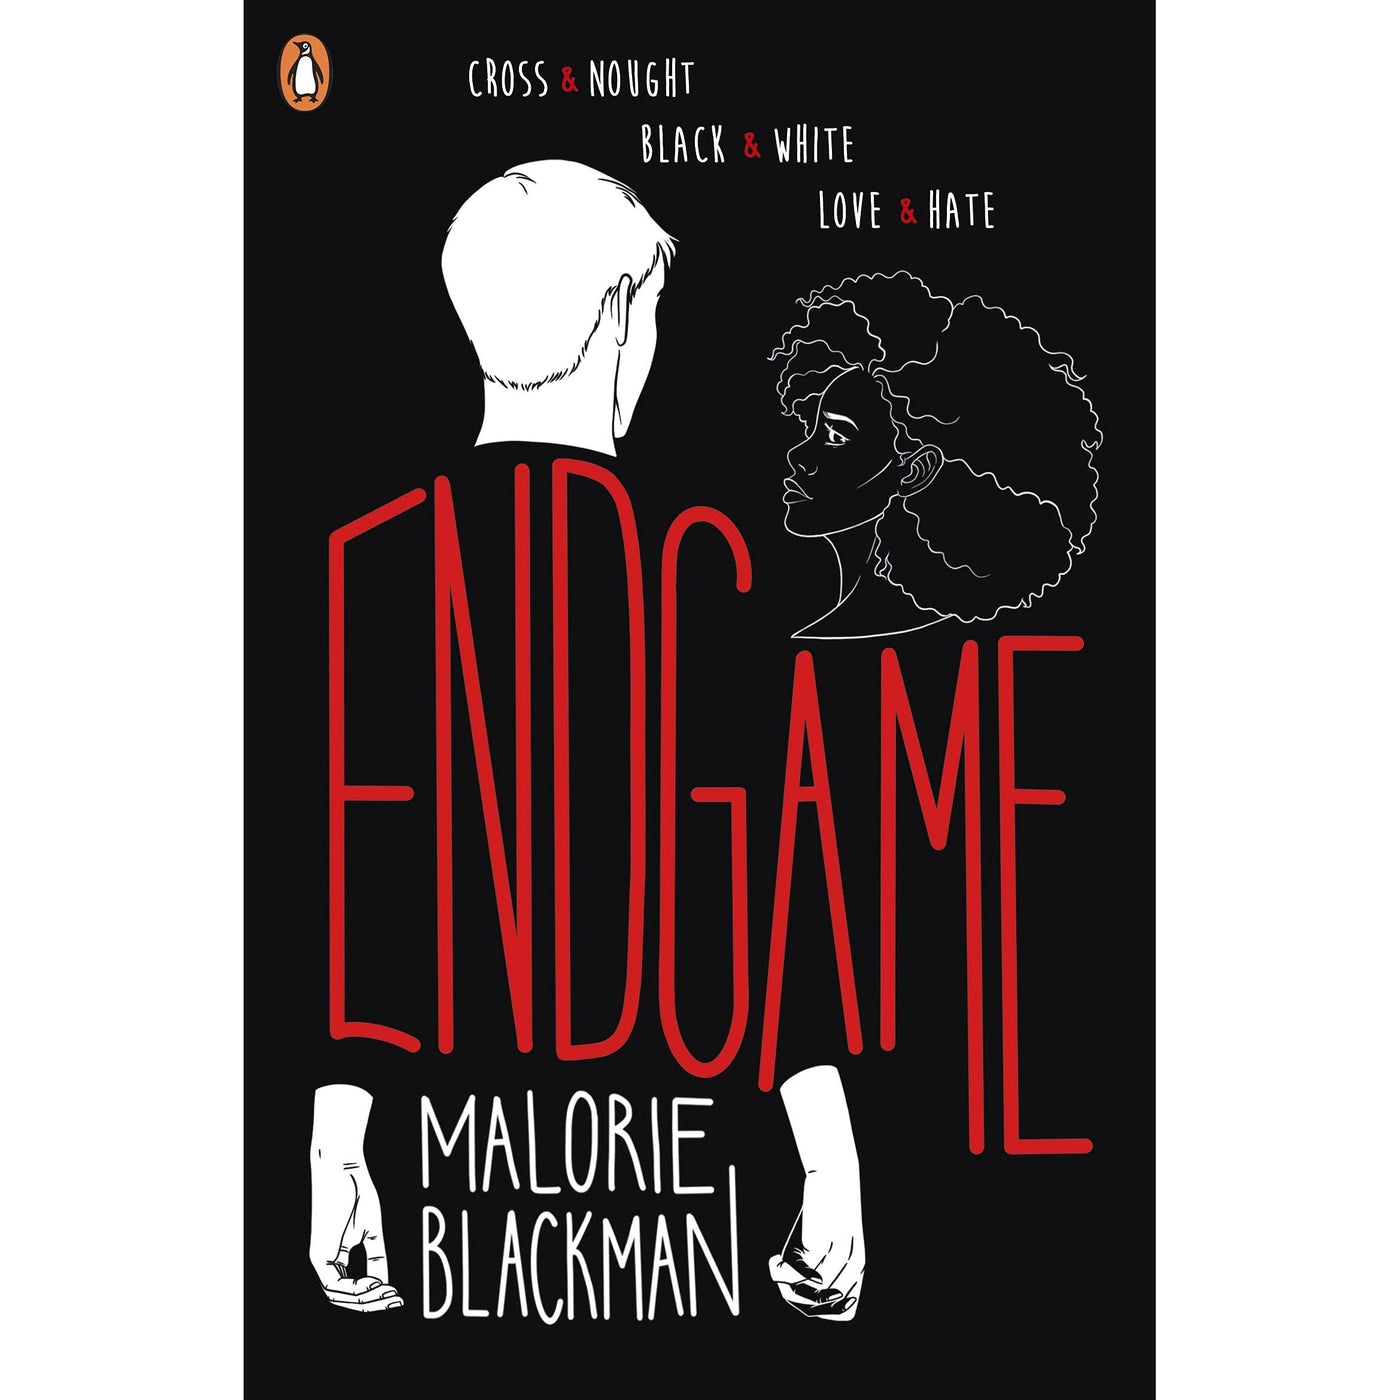 Endgame: The Final Book In The Groundbreaking Series - Noughts & Crosses (Noughts And Crosses Book 6) - Malorie Blackman